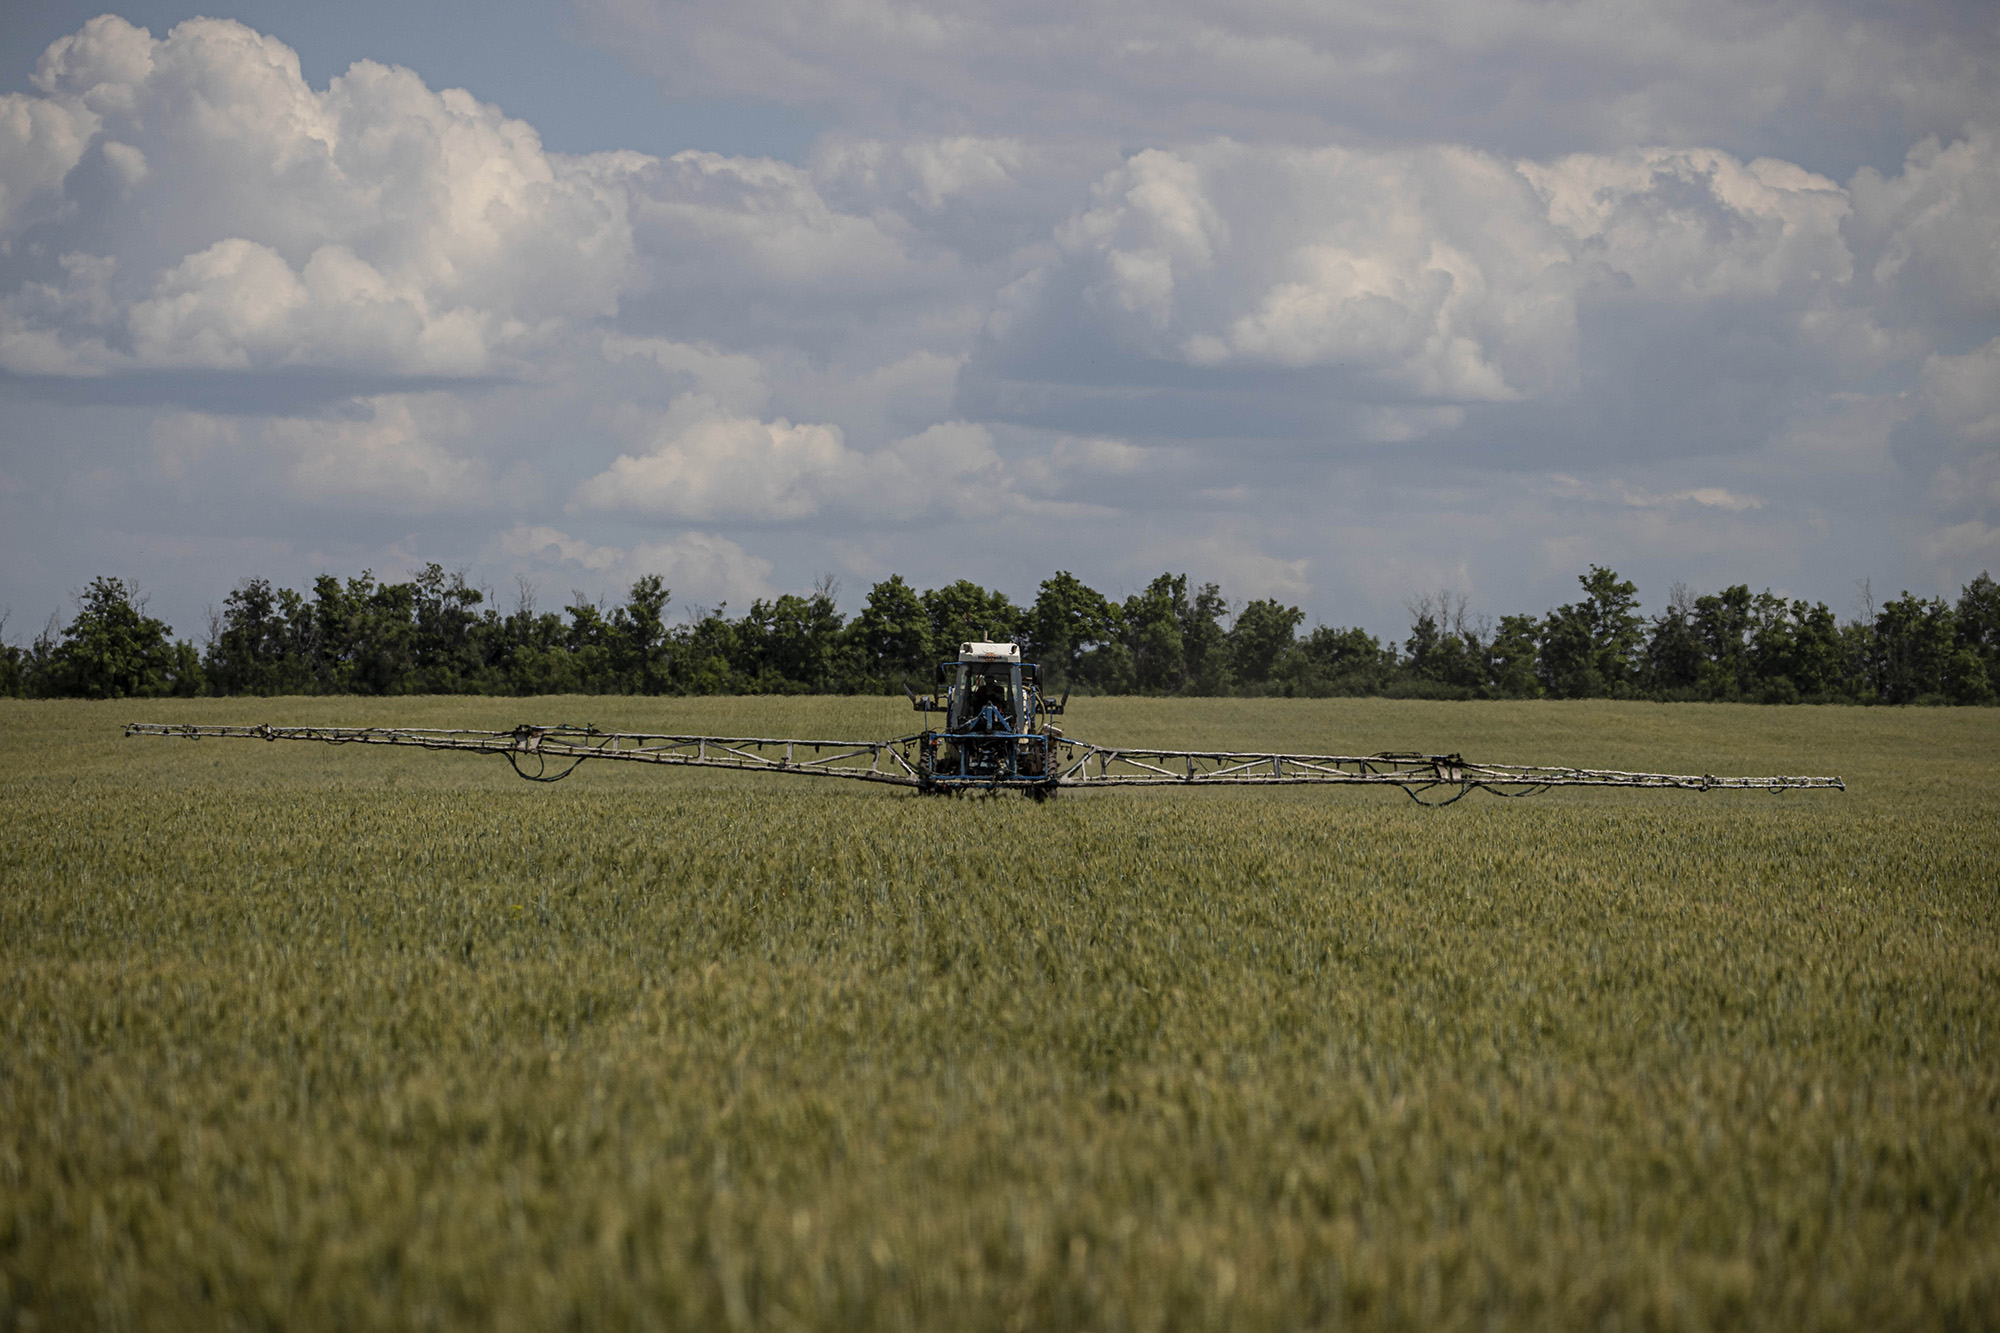 A farmer uses an agricultural machine in a wheat farm in Odesa, Ukraine, on June 17.